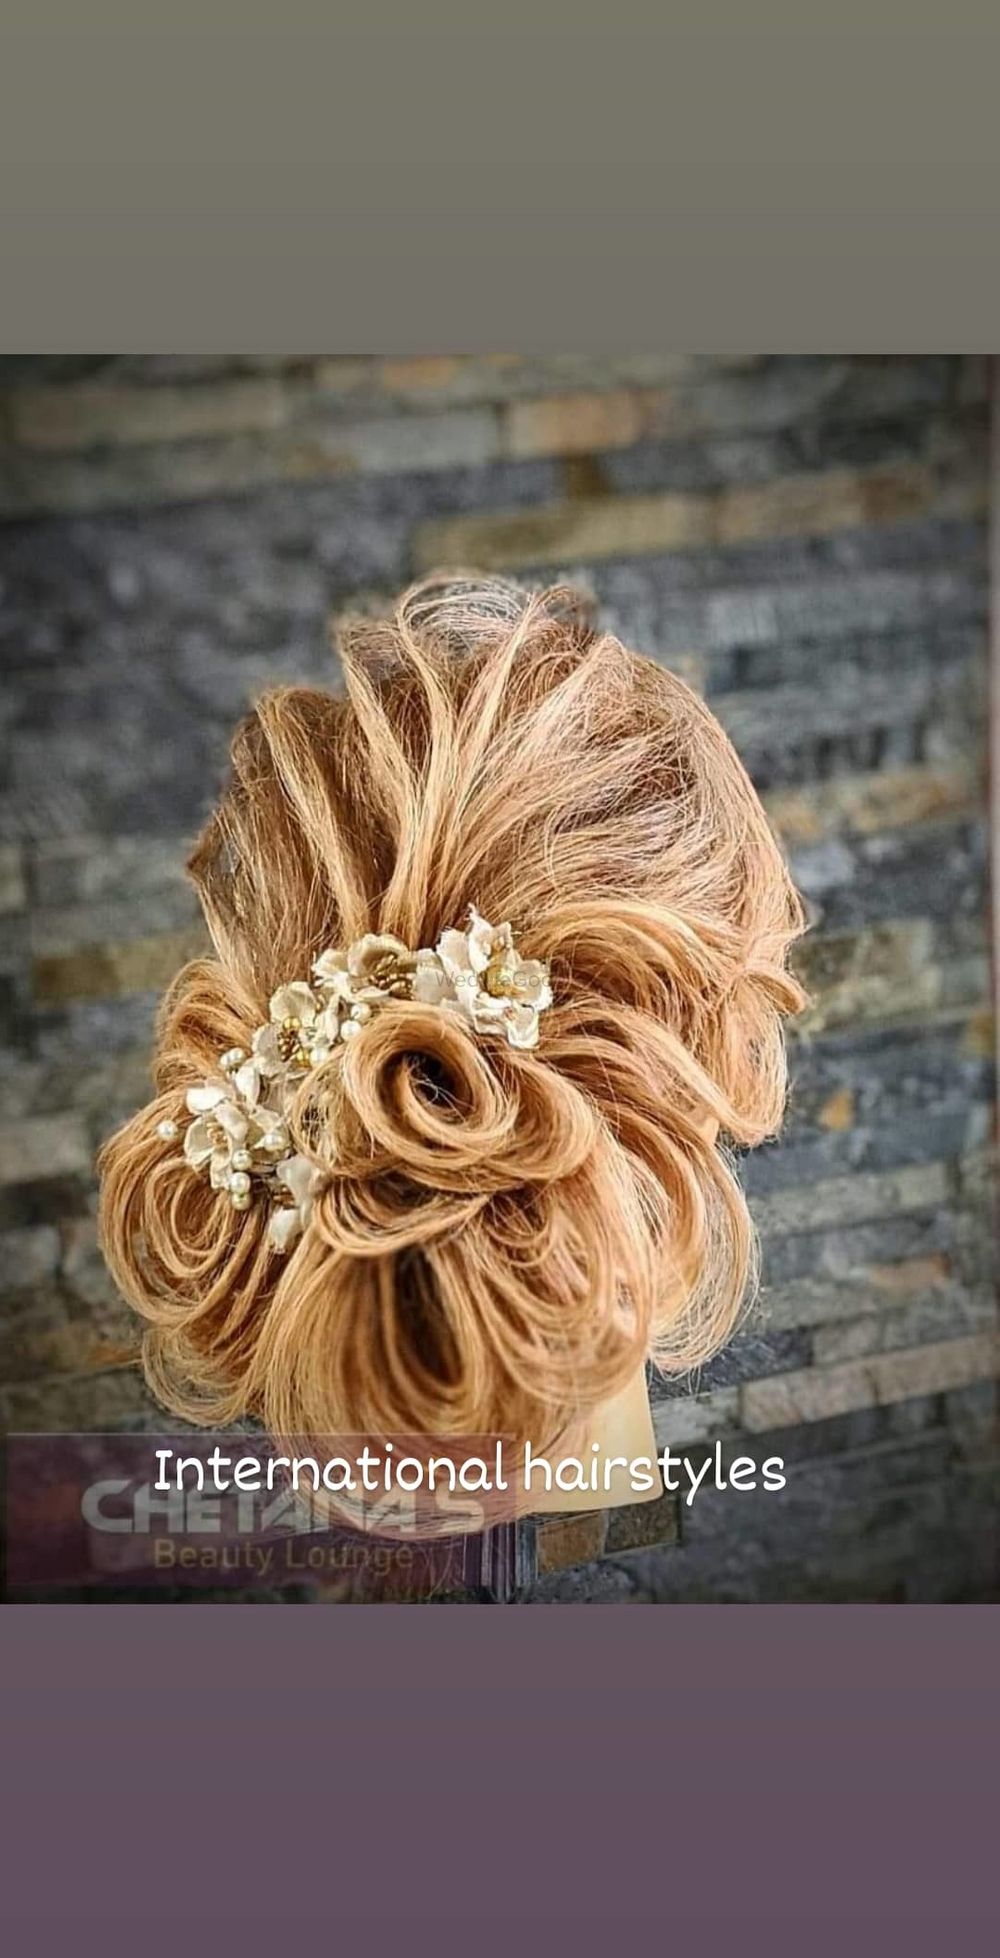 Photo From Bridal Hairstyles - By Chetana Beauty Lounge